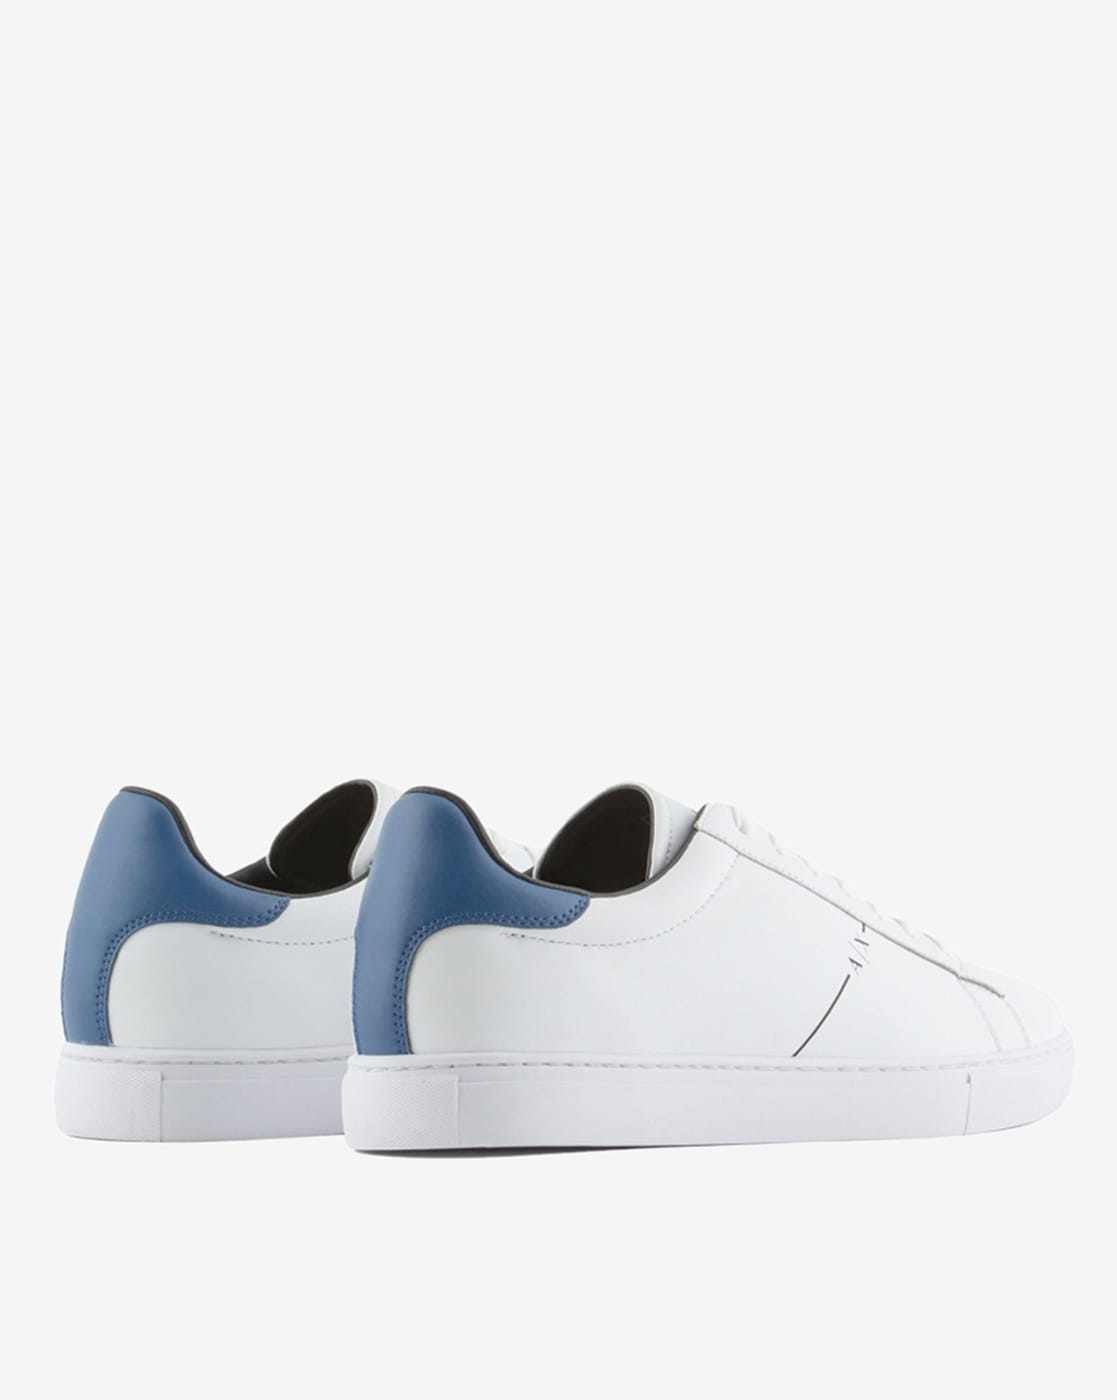 Armani Exchange sneakers in white with navy inserts | ASOS